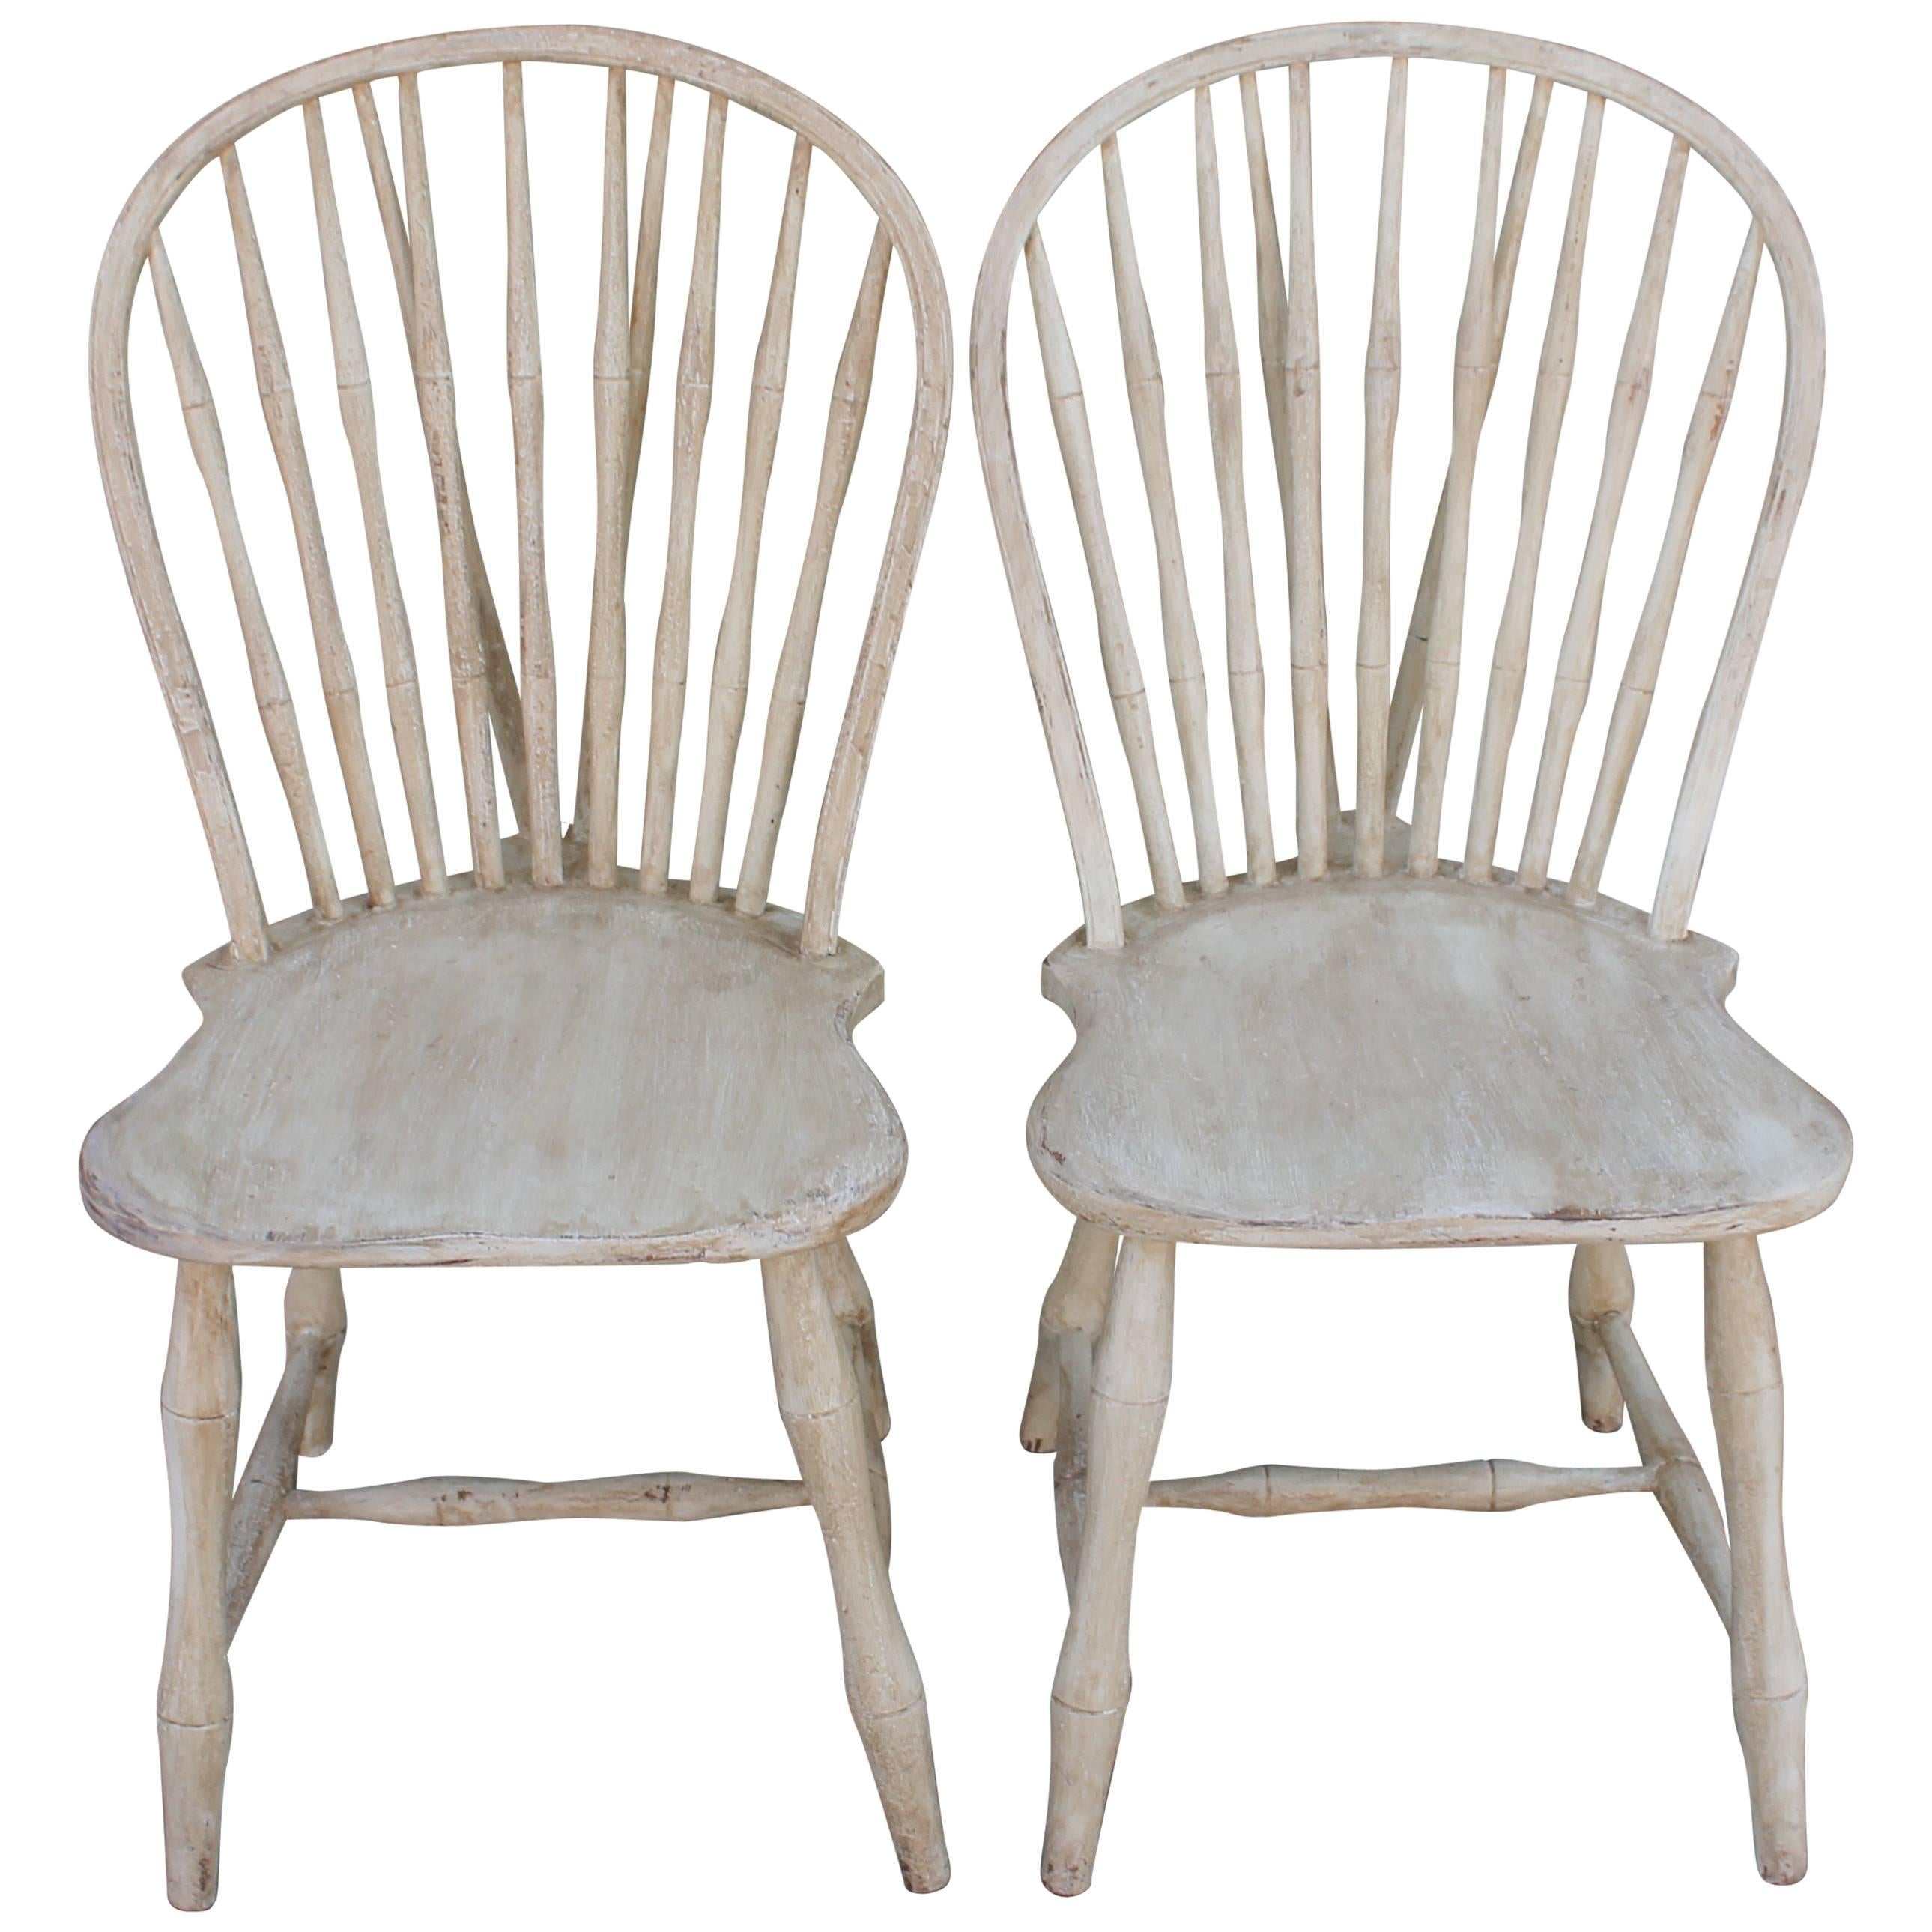 Pair of 19th Century White Painted Windsor Chairs